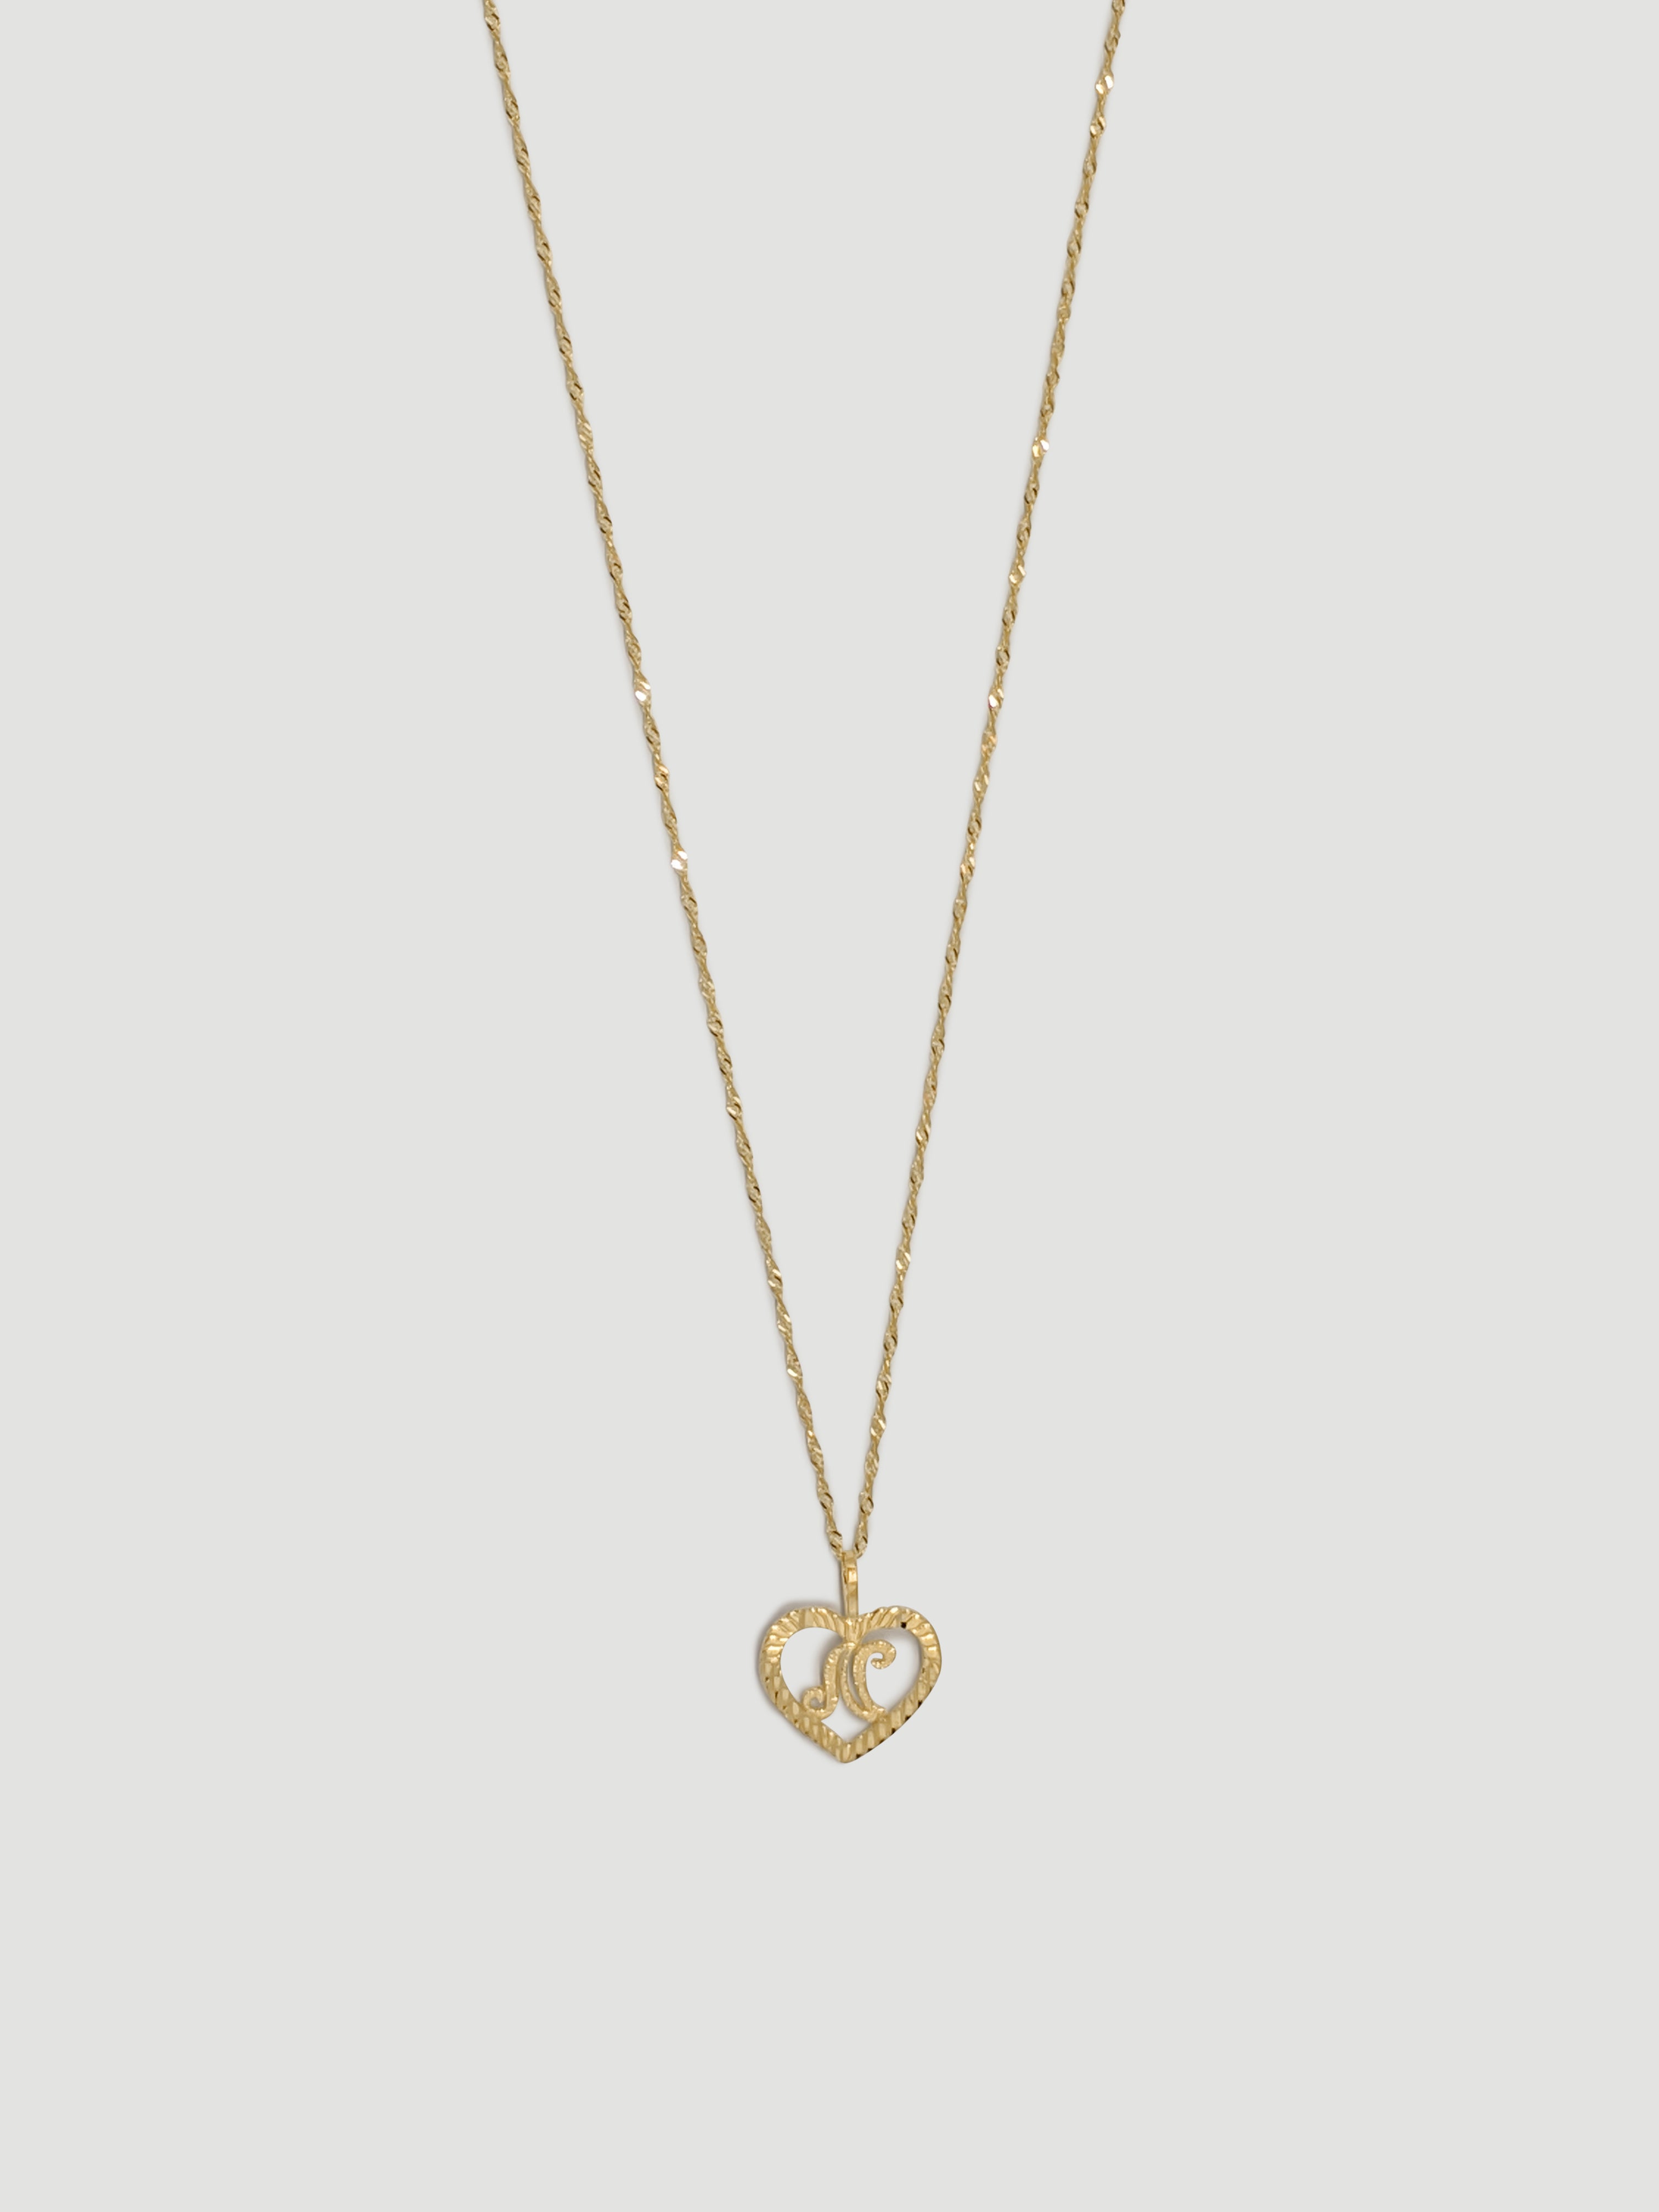 THE INITIALLY IN LOVE PENDANT